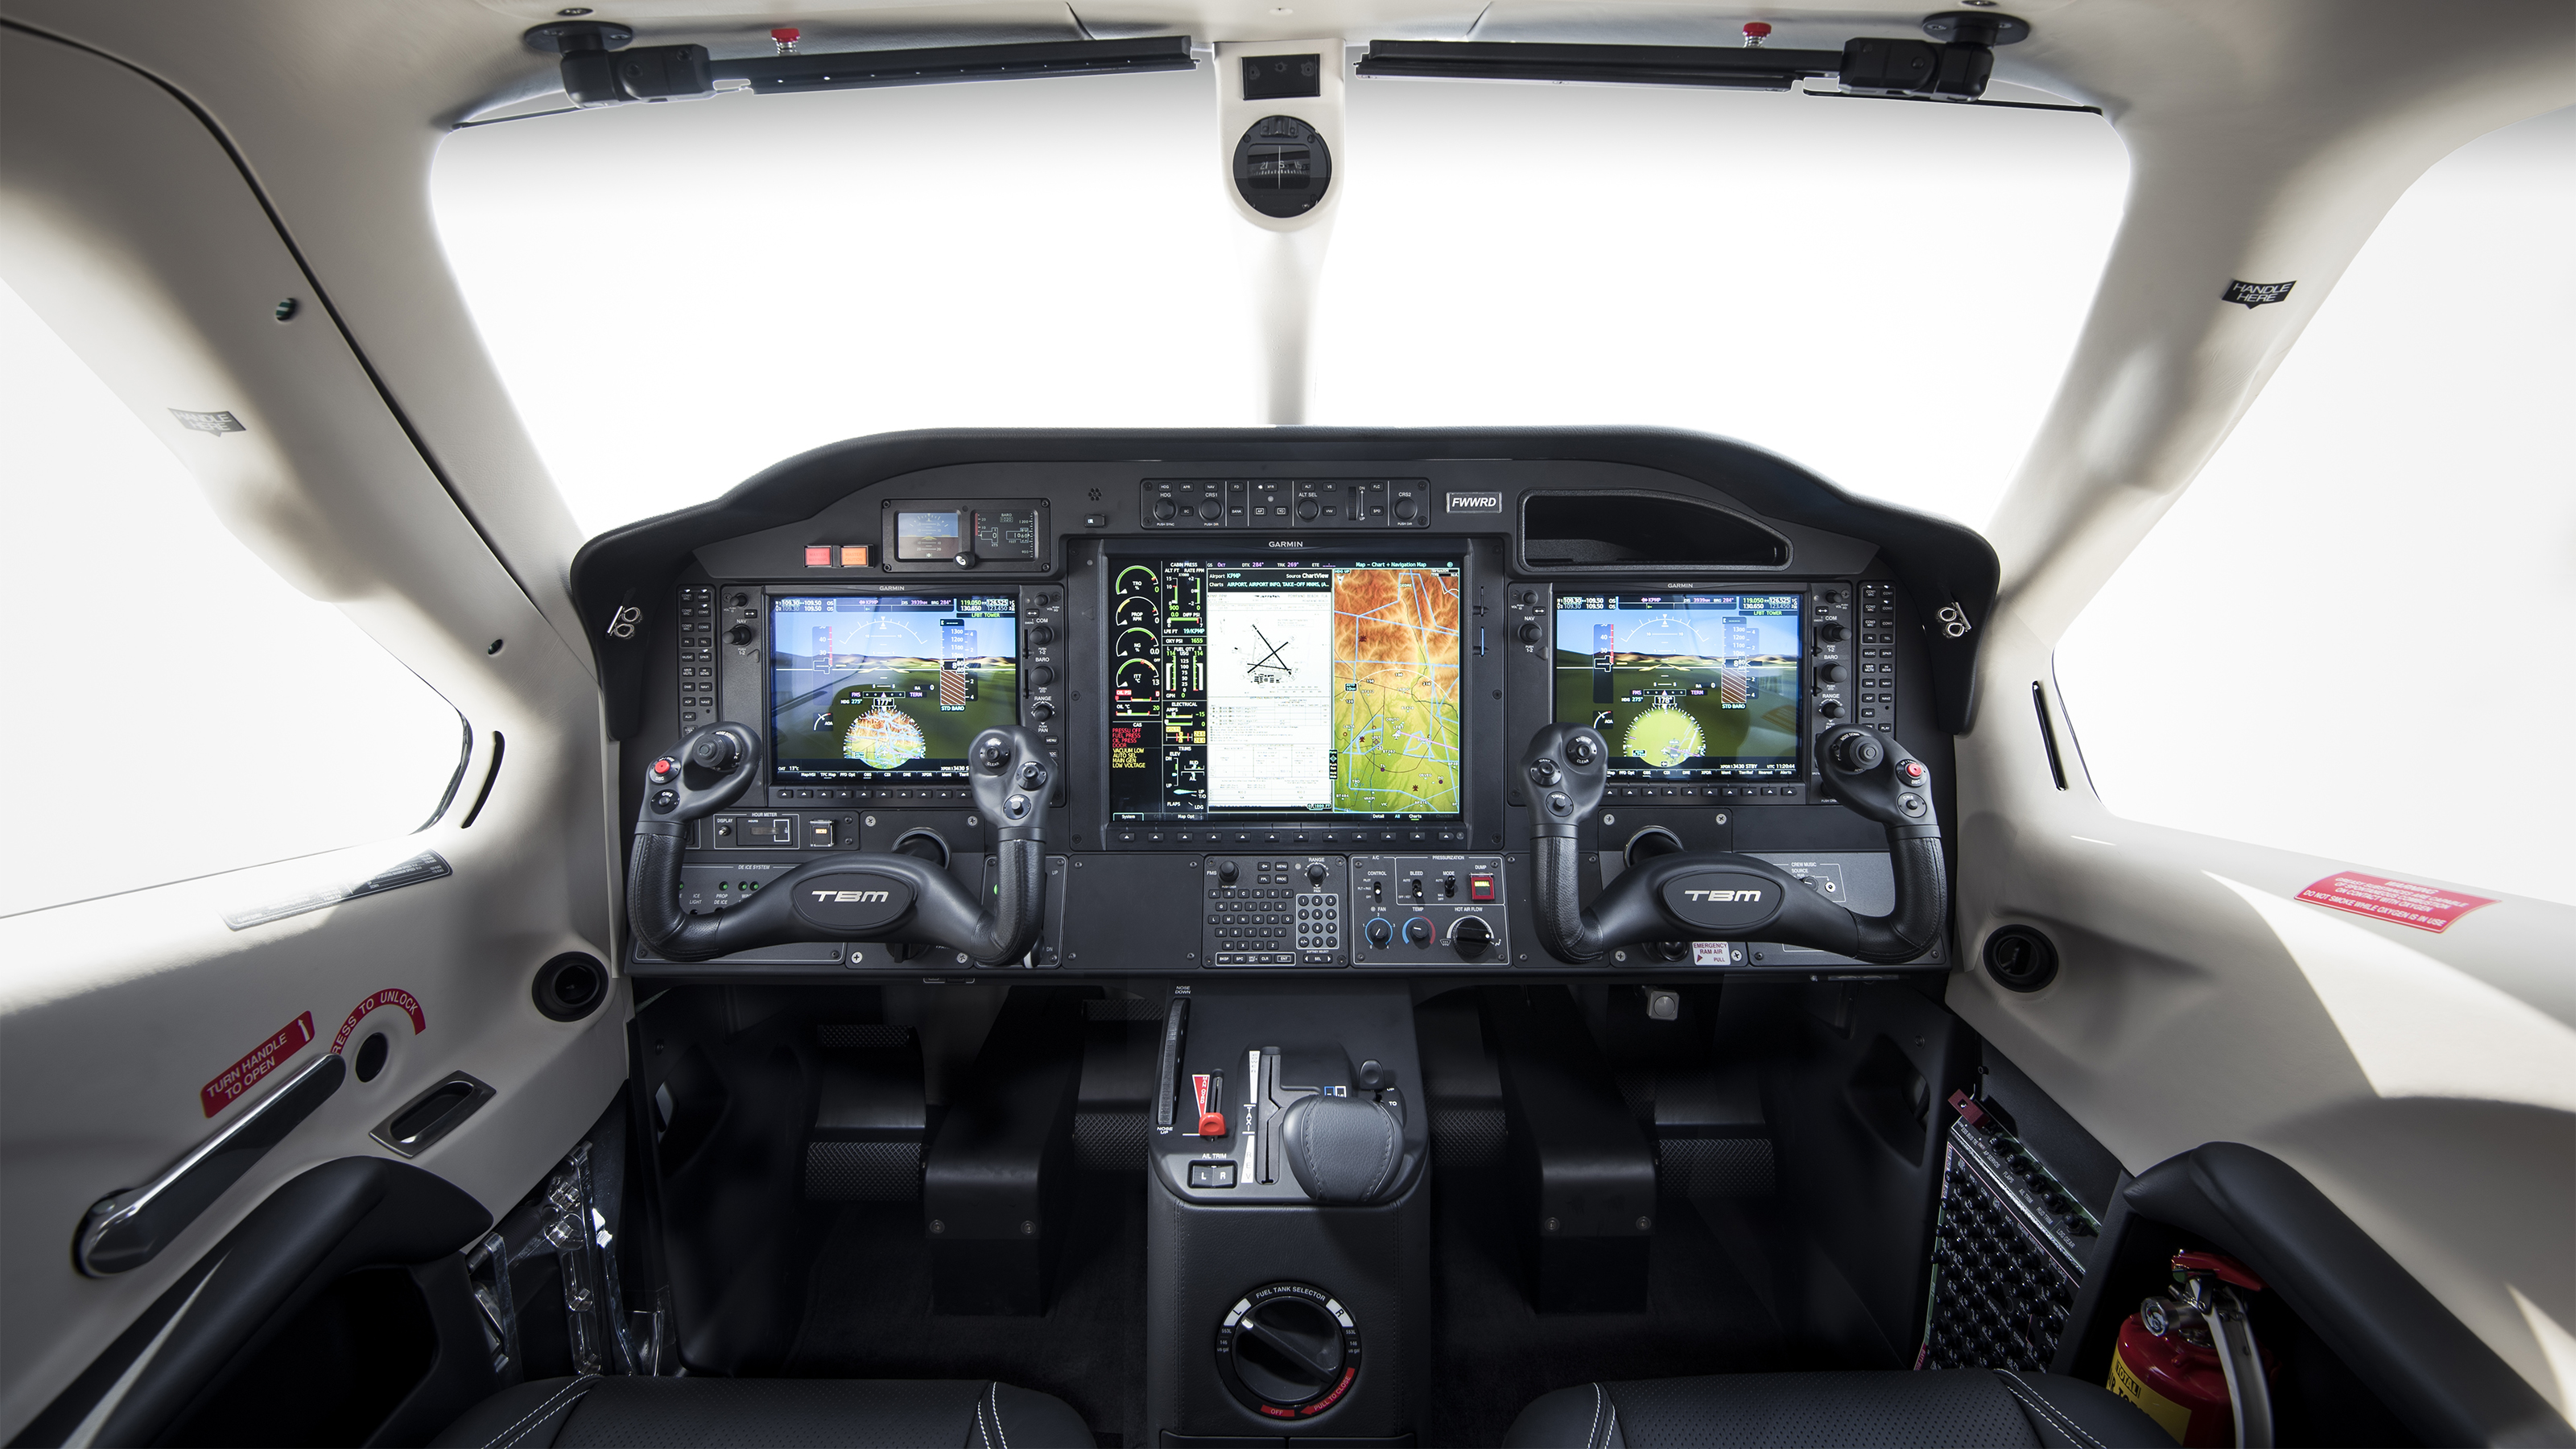 The new TBM 910 features the upgraded Garmin G1000 NXi panel. Image courtesy of Daher.